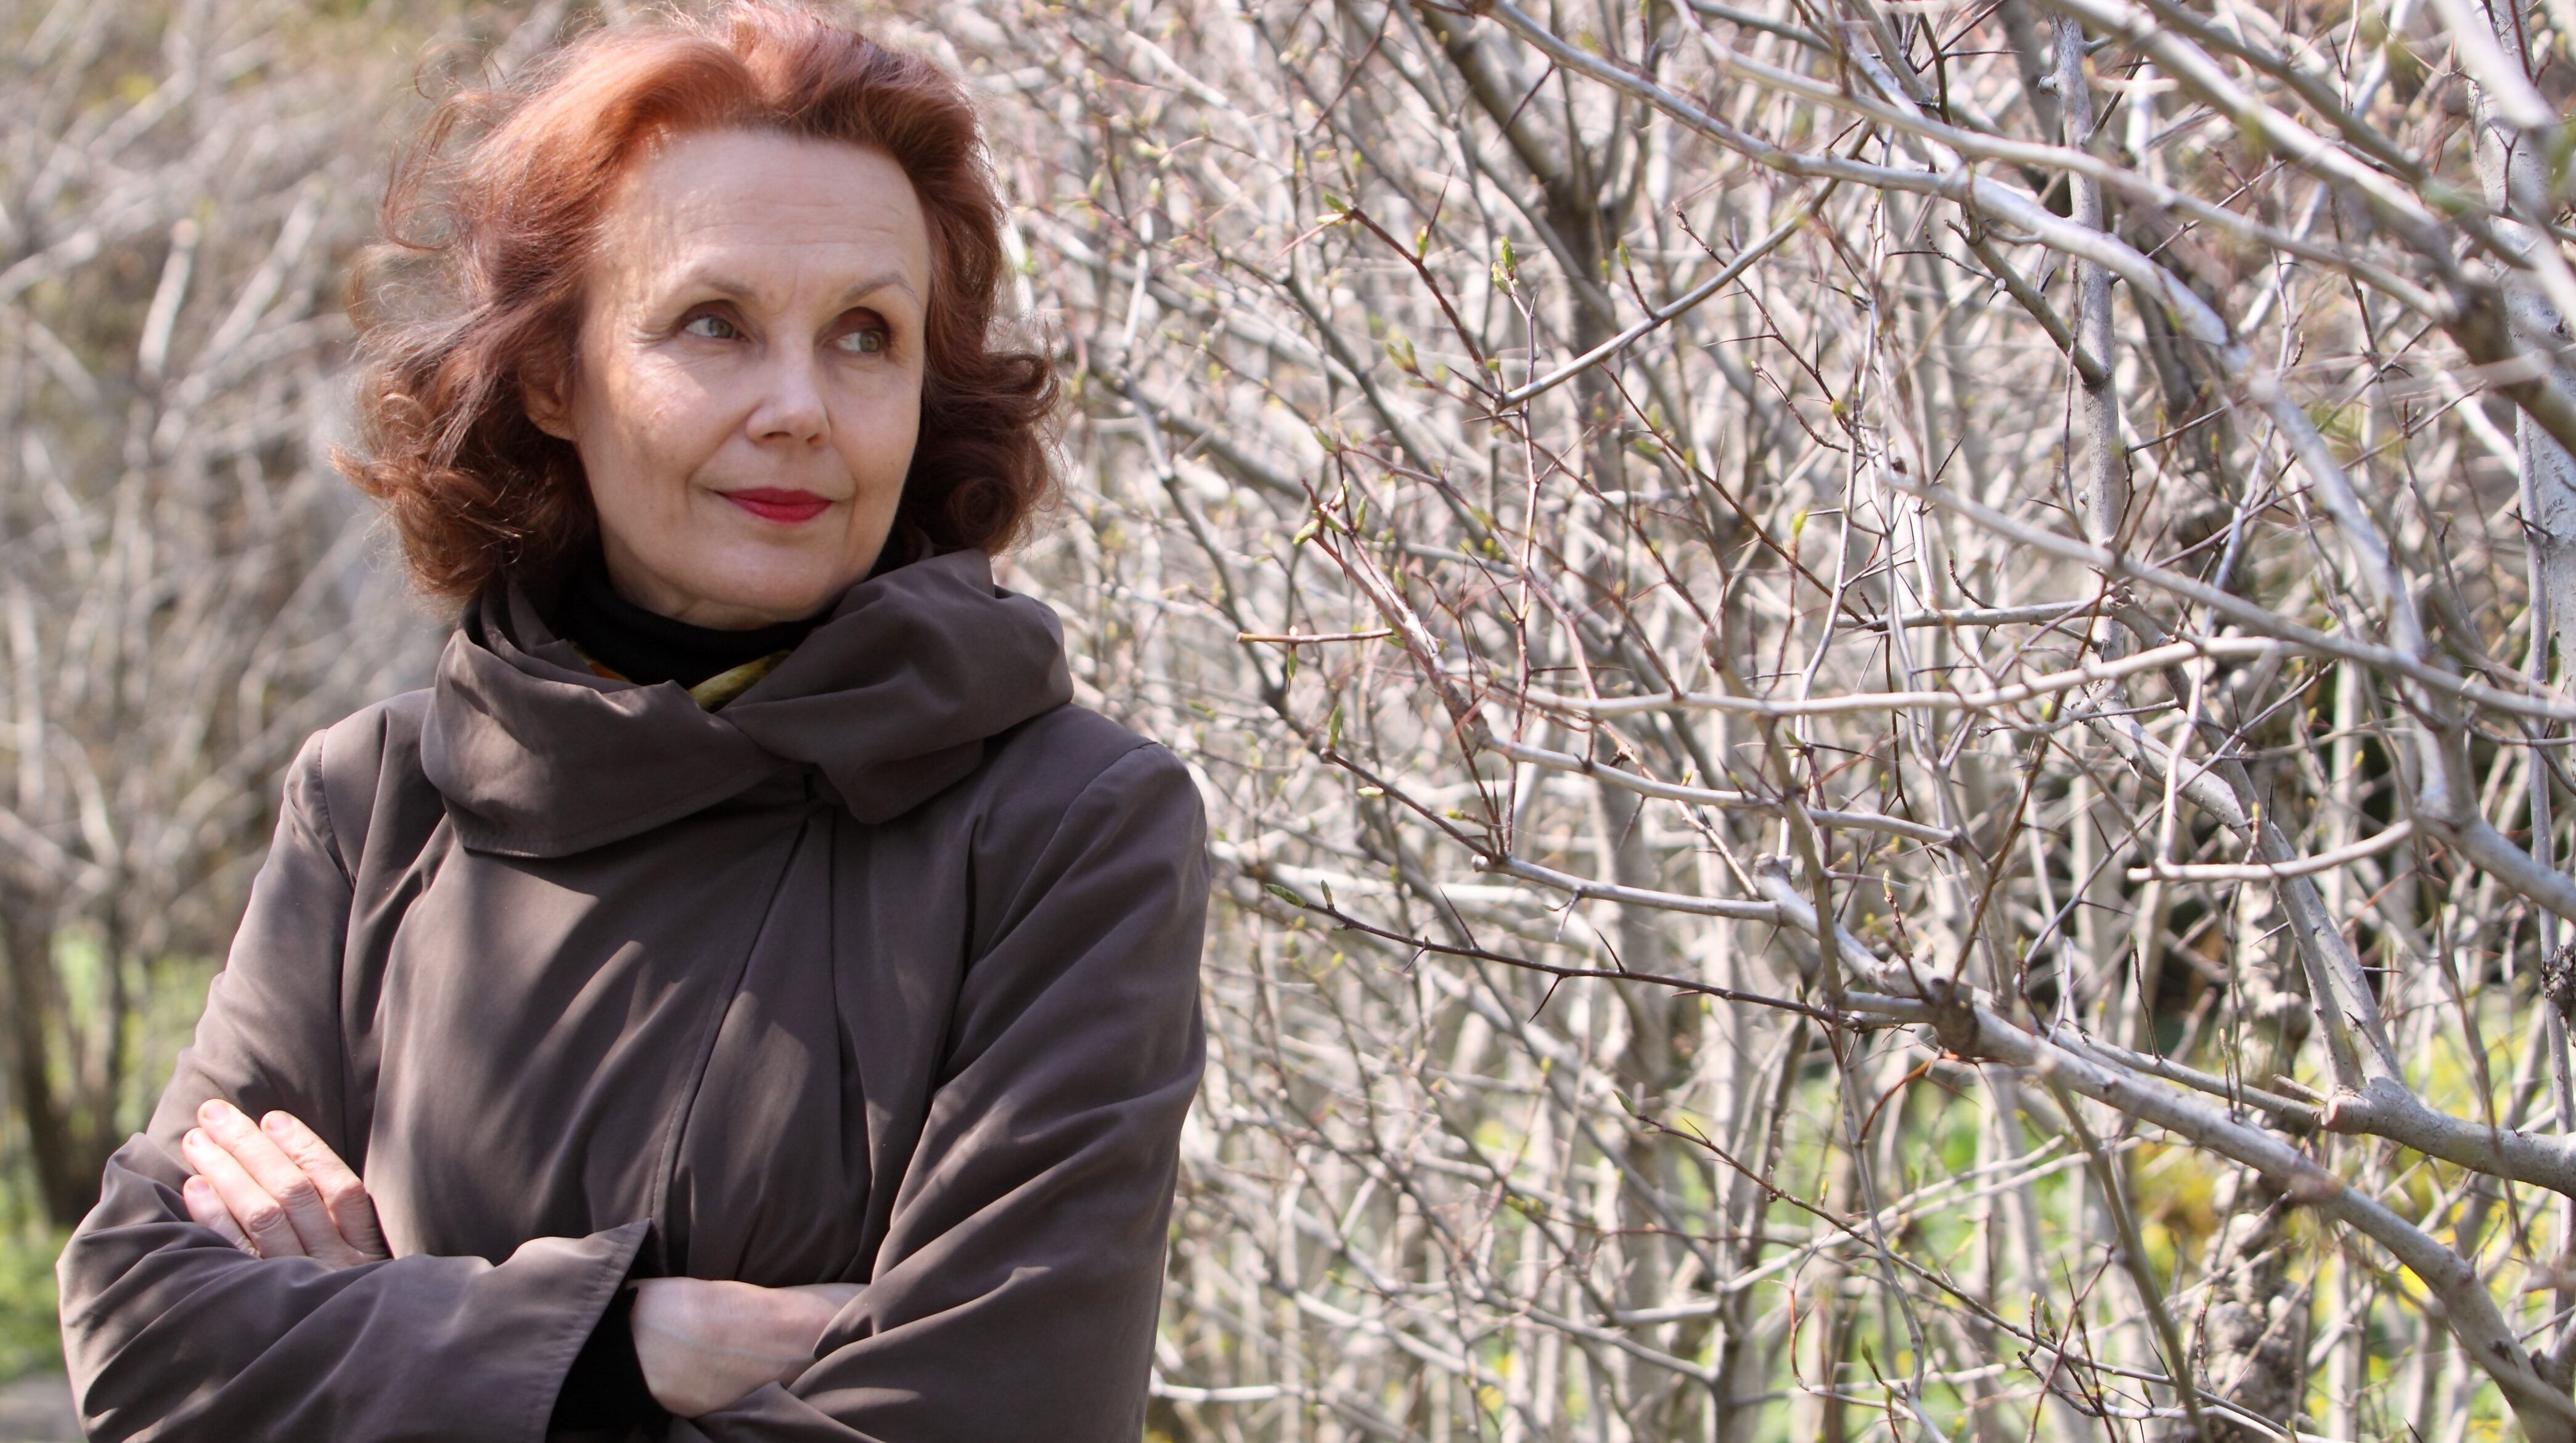 Featured image for “Prominent Finnish Composer Kaija Saariaho Has Died, Aged 70”